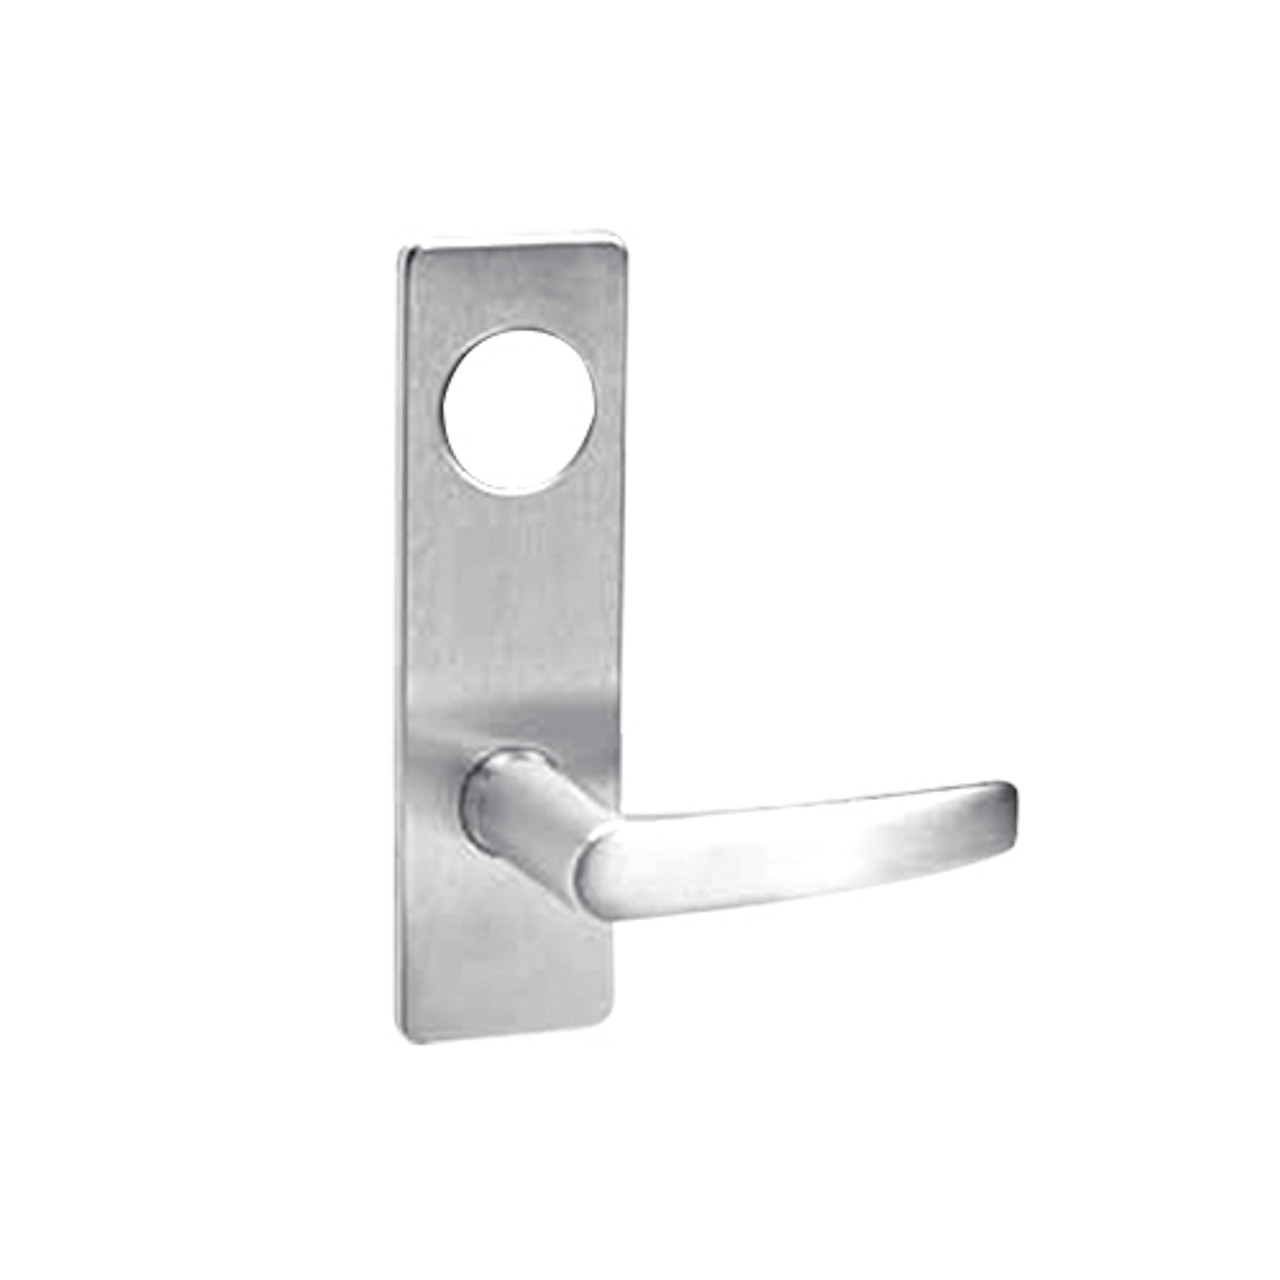 ML2057-ASN-629-LC Corbin Russwin ML2000 Series Mortise Storeroom Locksets with Armstrong Lever in Bright Stainless Steel